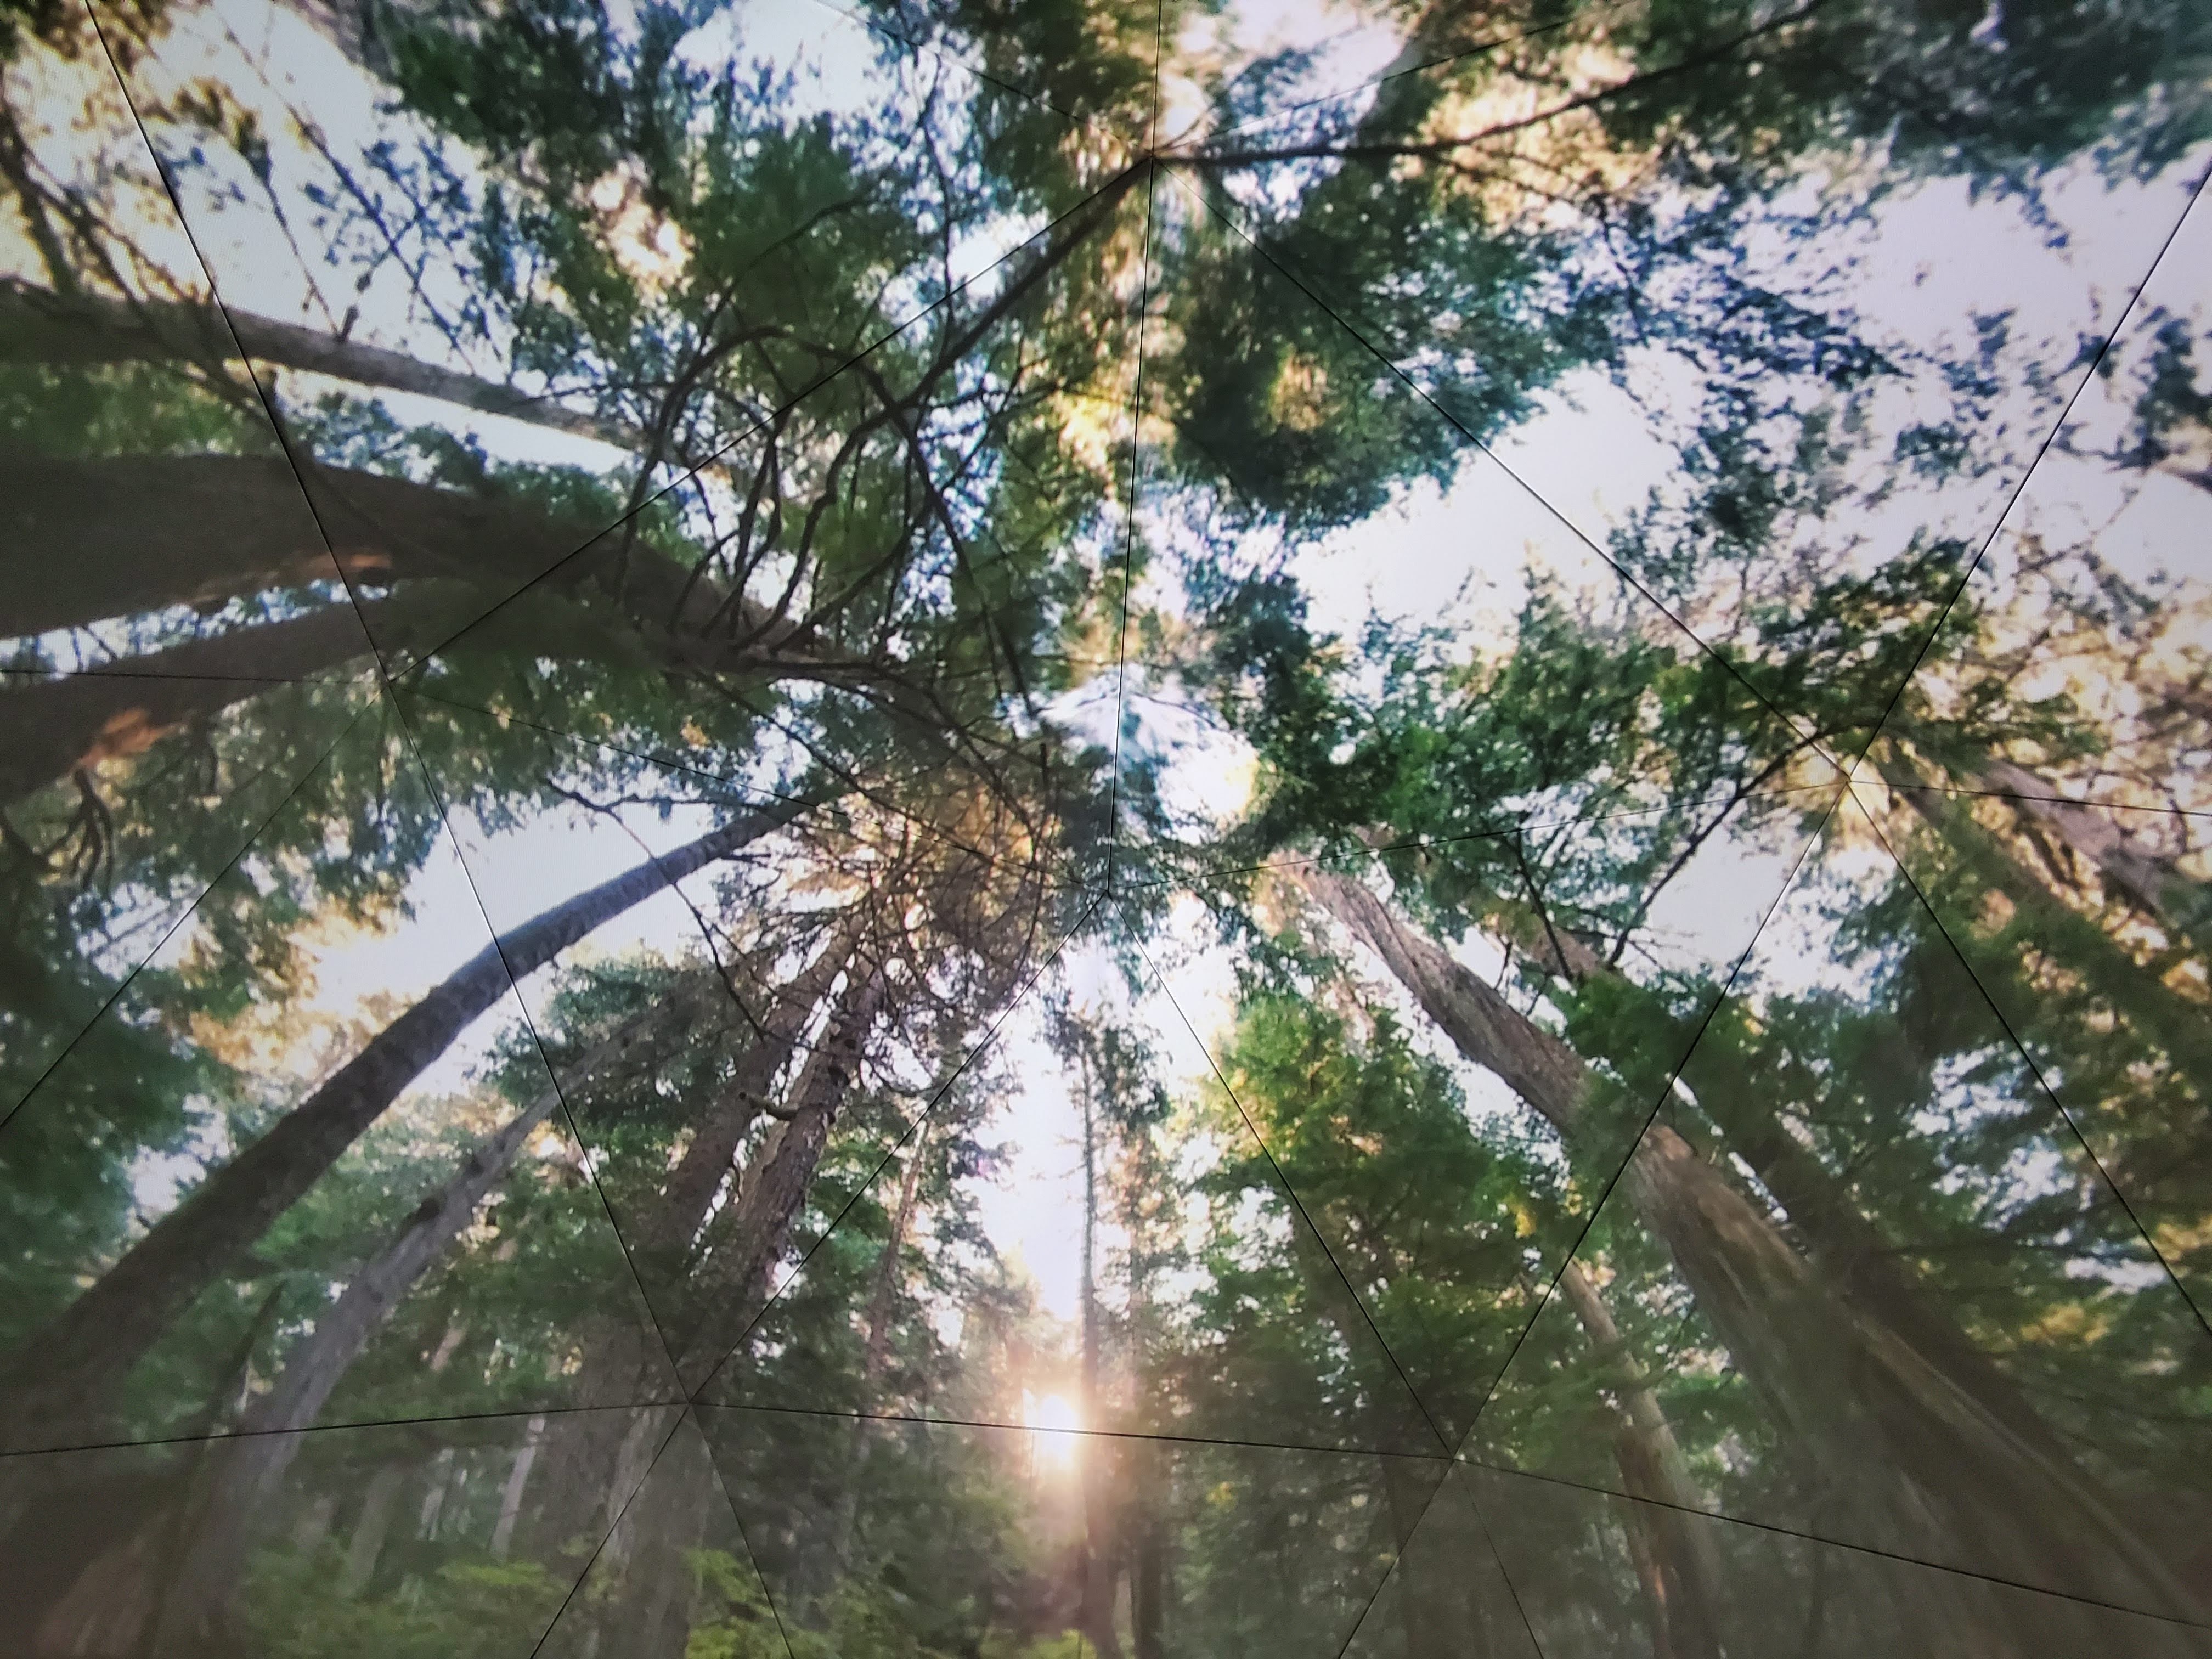 Picture of an ancient forest, angled upwards to showcase height of trees